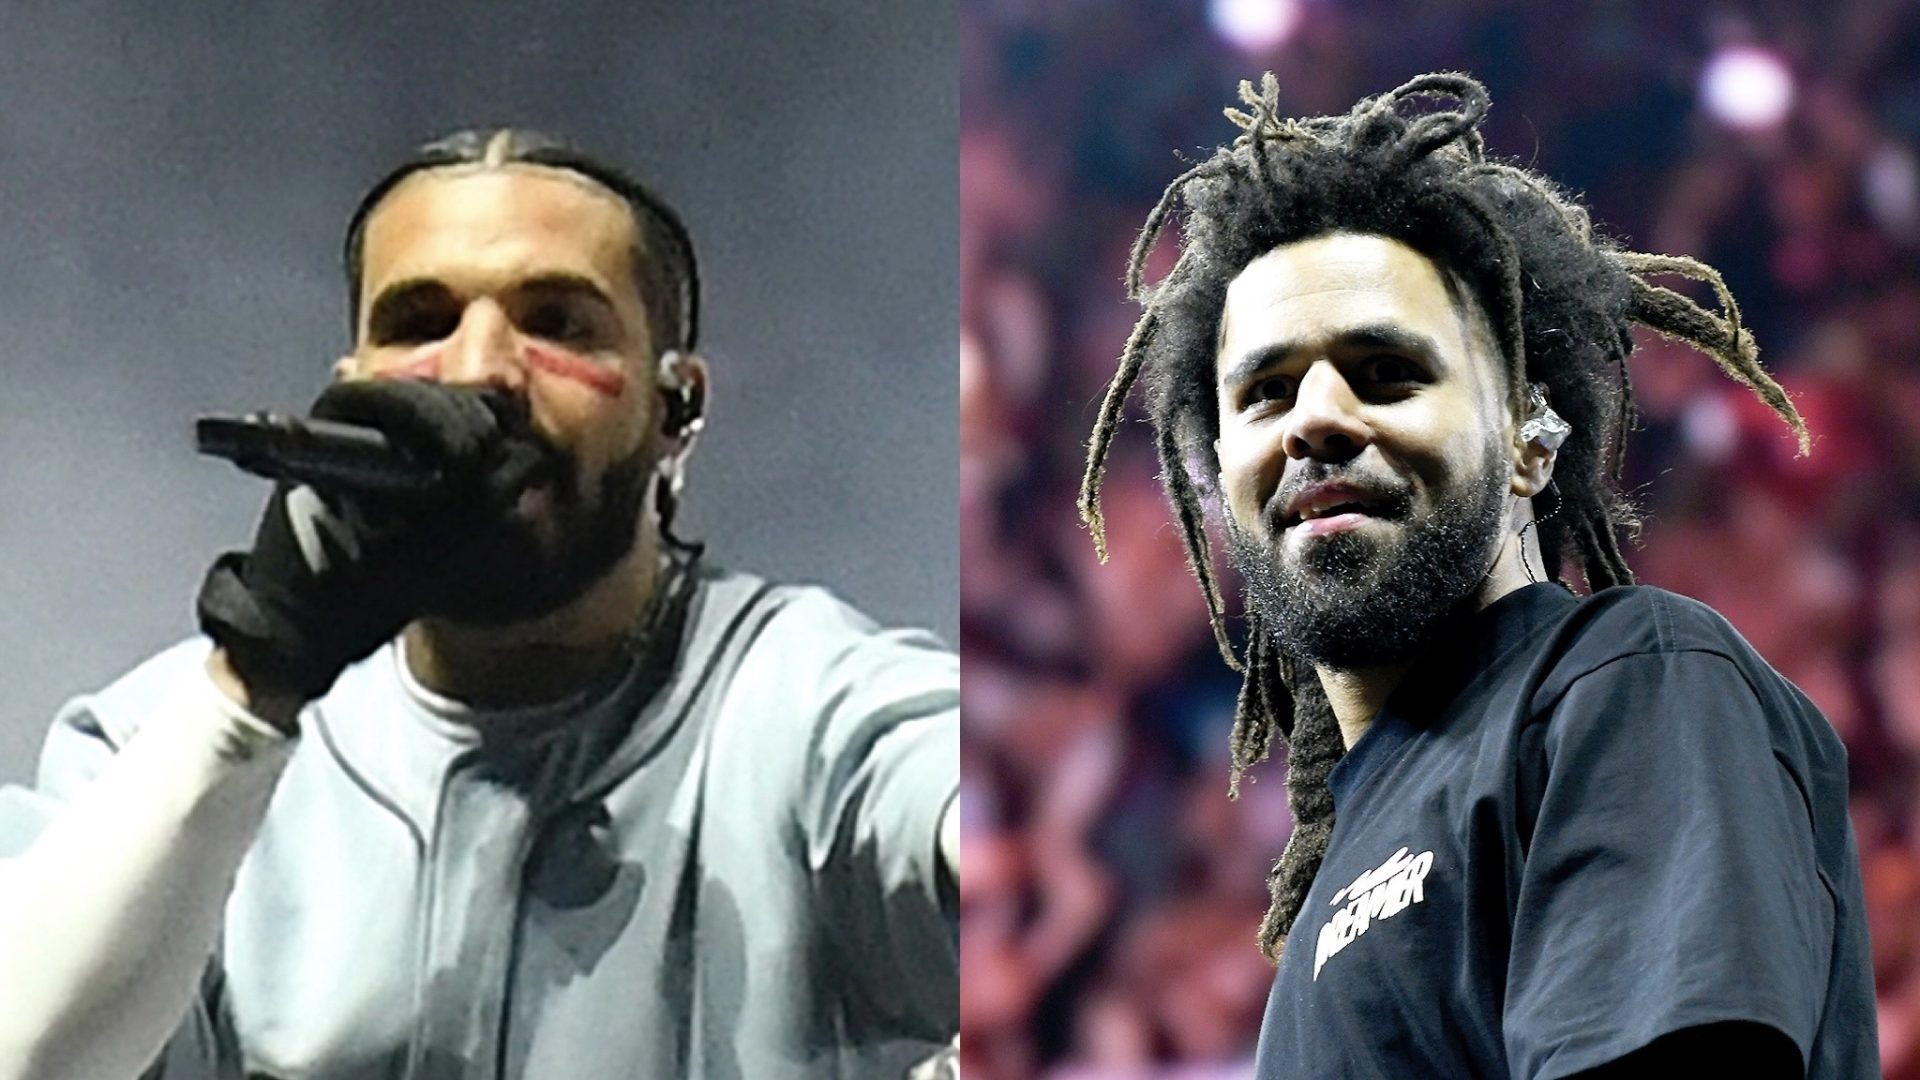 Drake Gives J. Cole His Flowers & Brings Out GloRilla, Lil Wayne, And More During Dreamville Festival Set